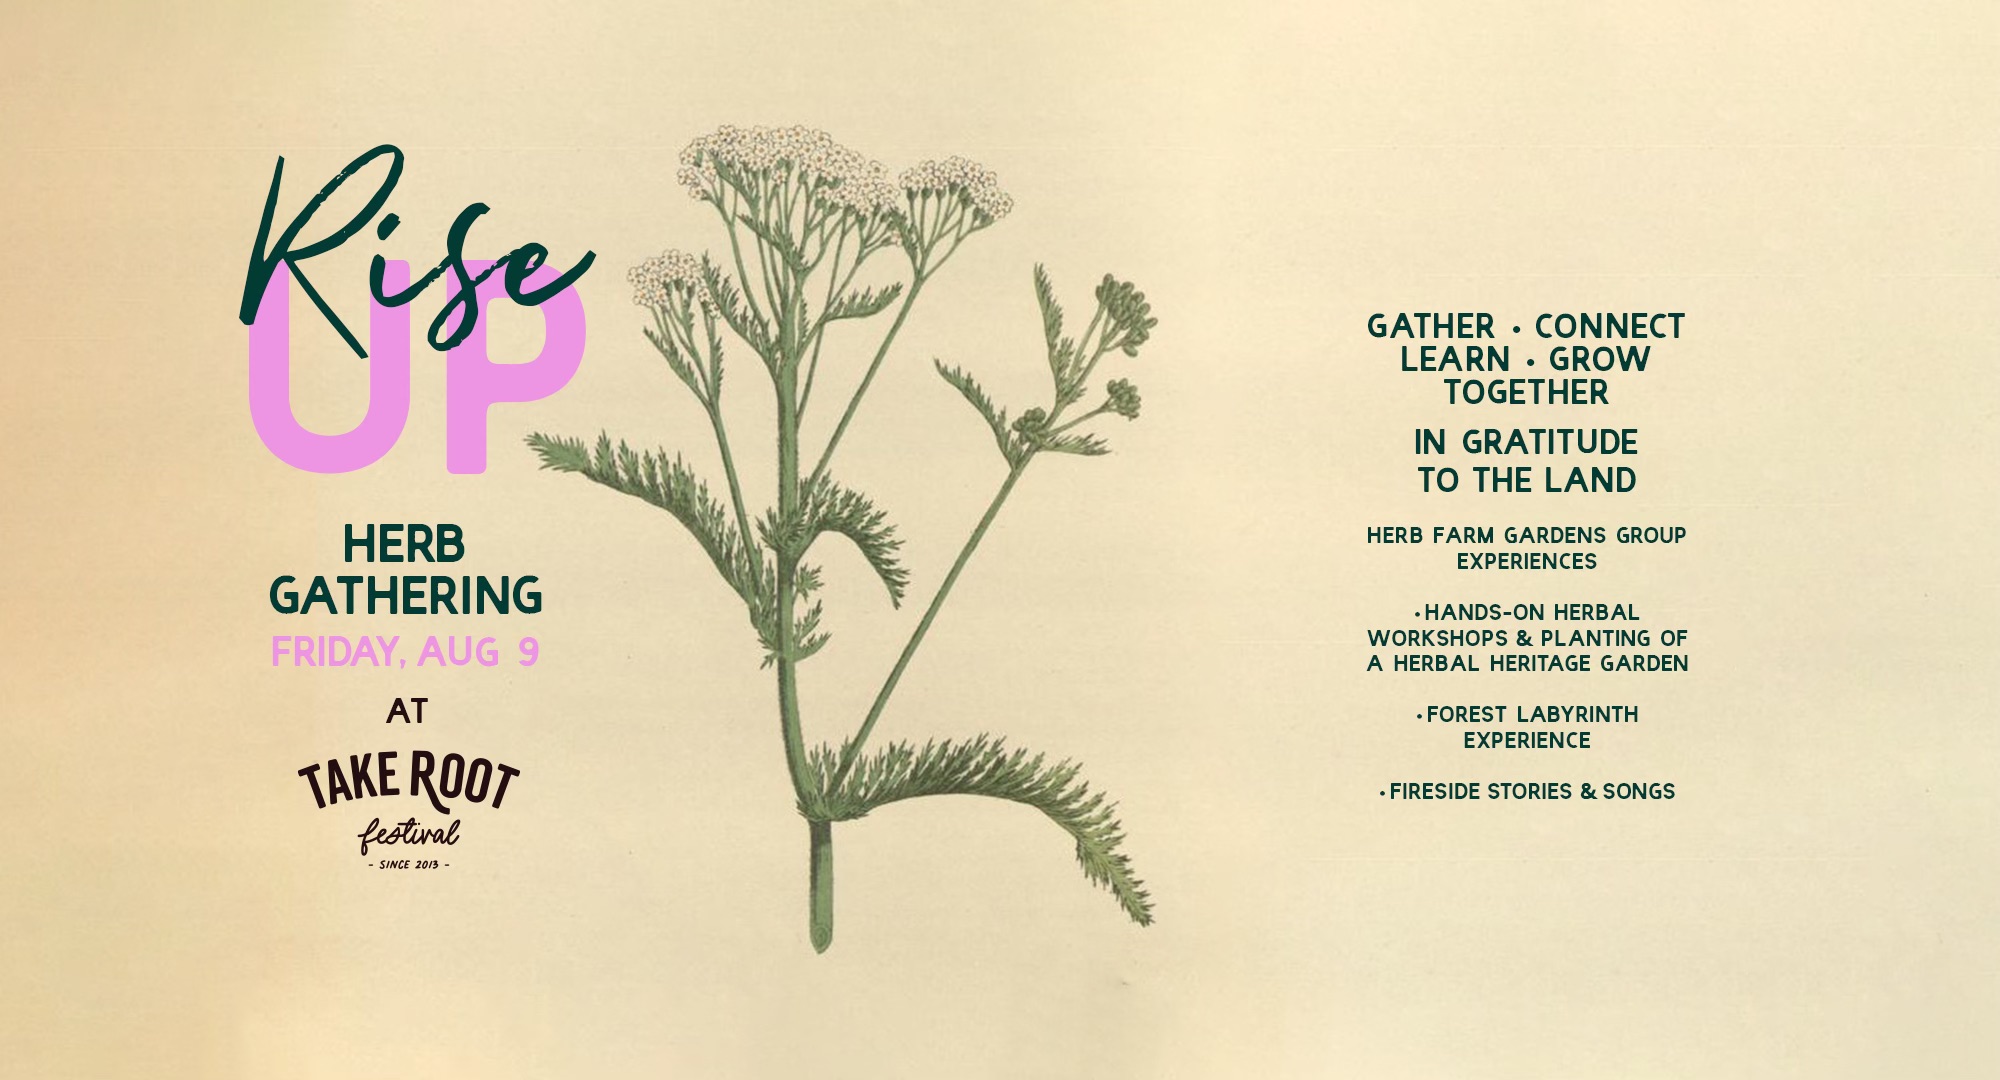 Rise Up Herb Gathering, Friday Aug 9 at Take Root Fest